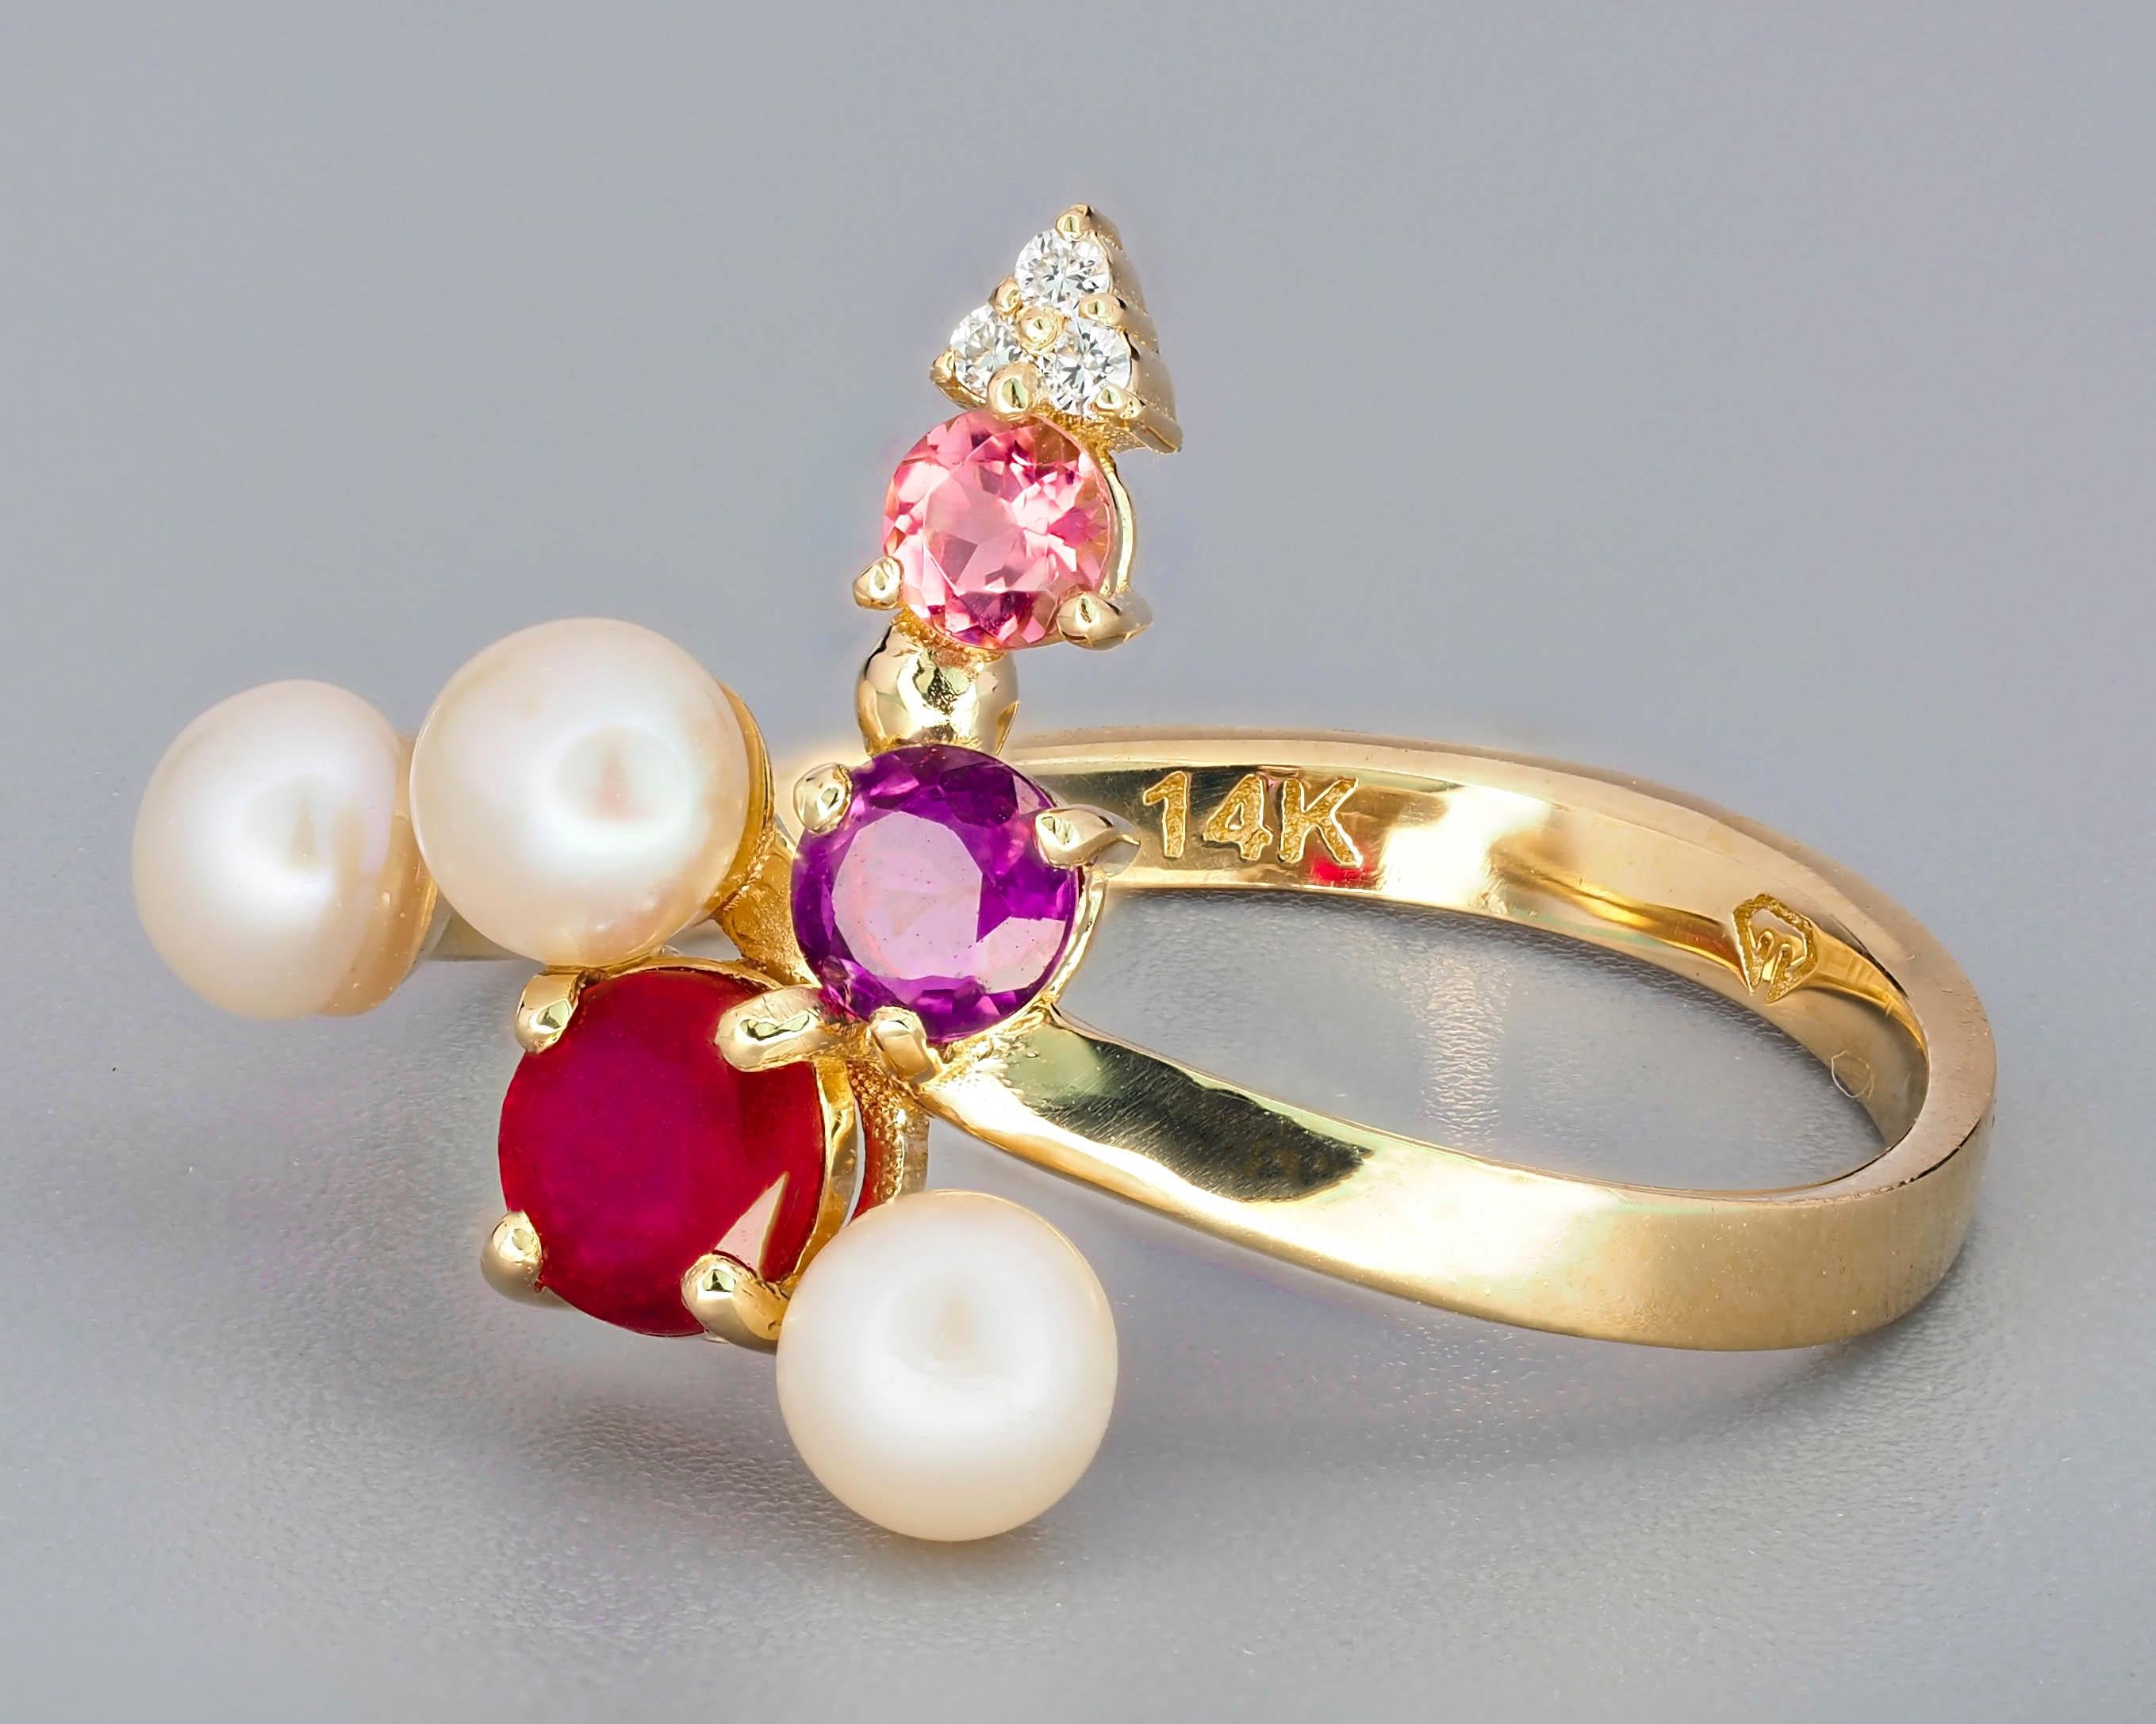 For Sale:   Ruby and multicolored gemstones ring in 14k gold! 6